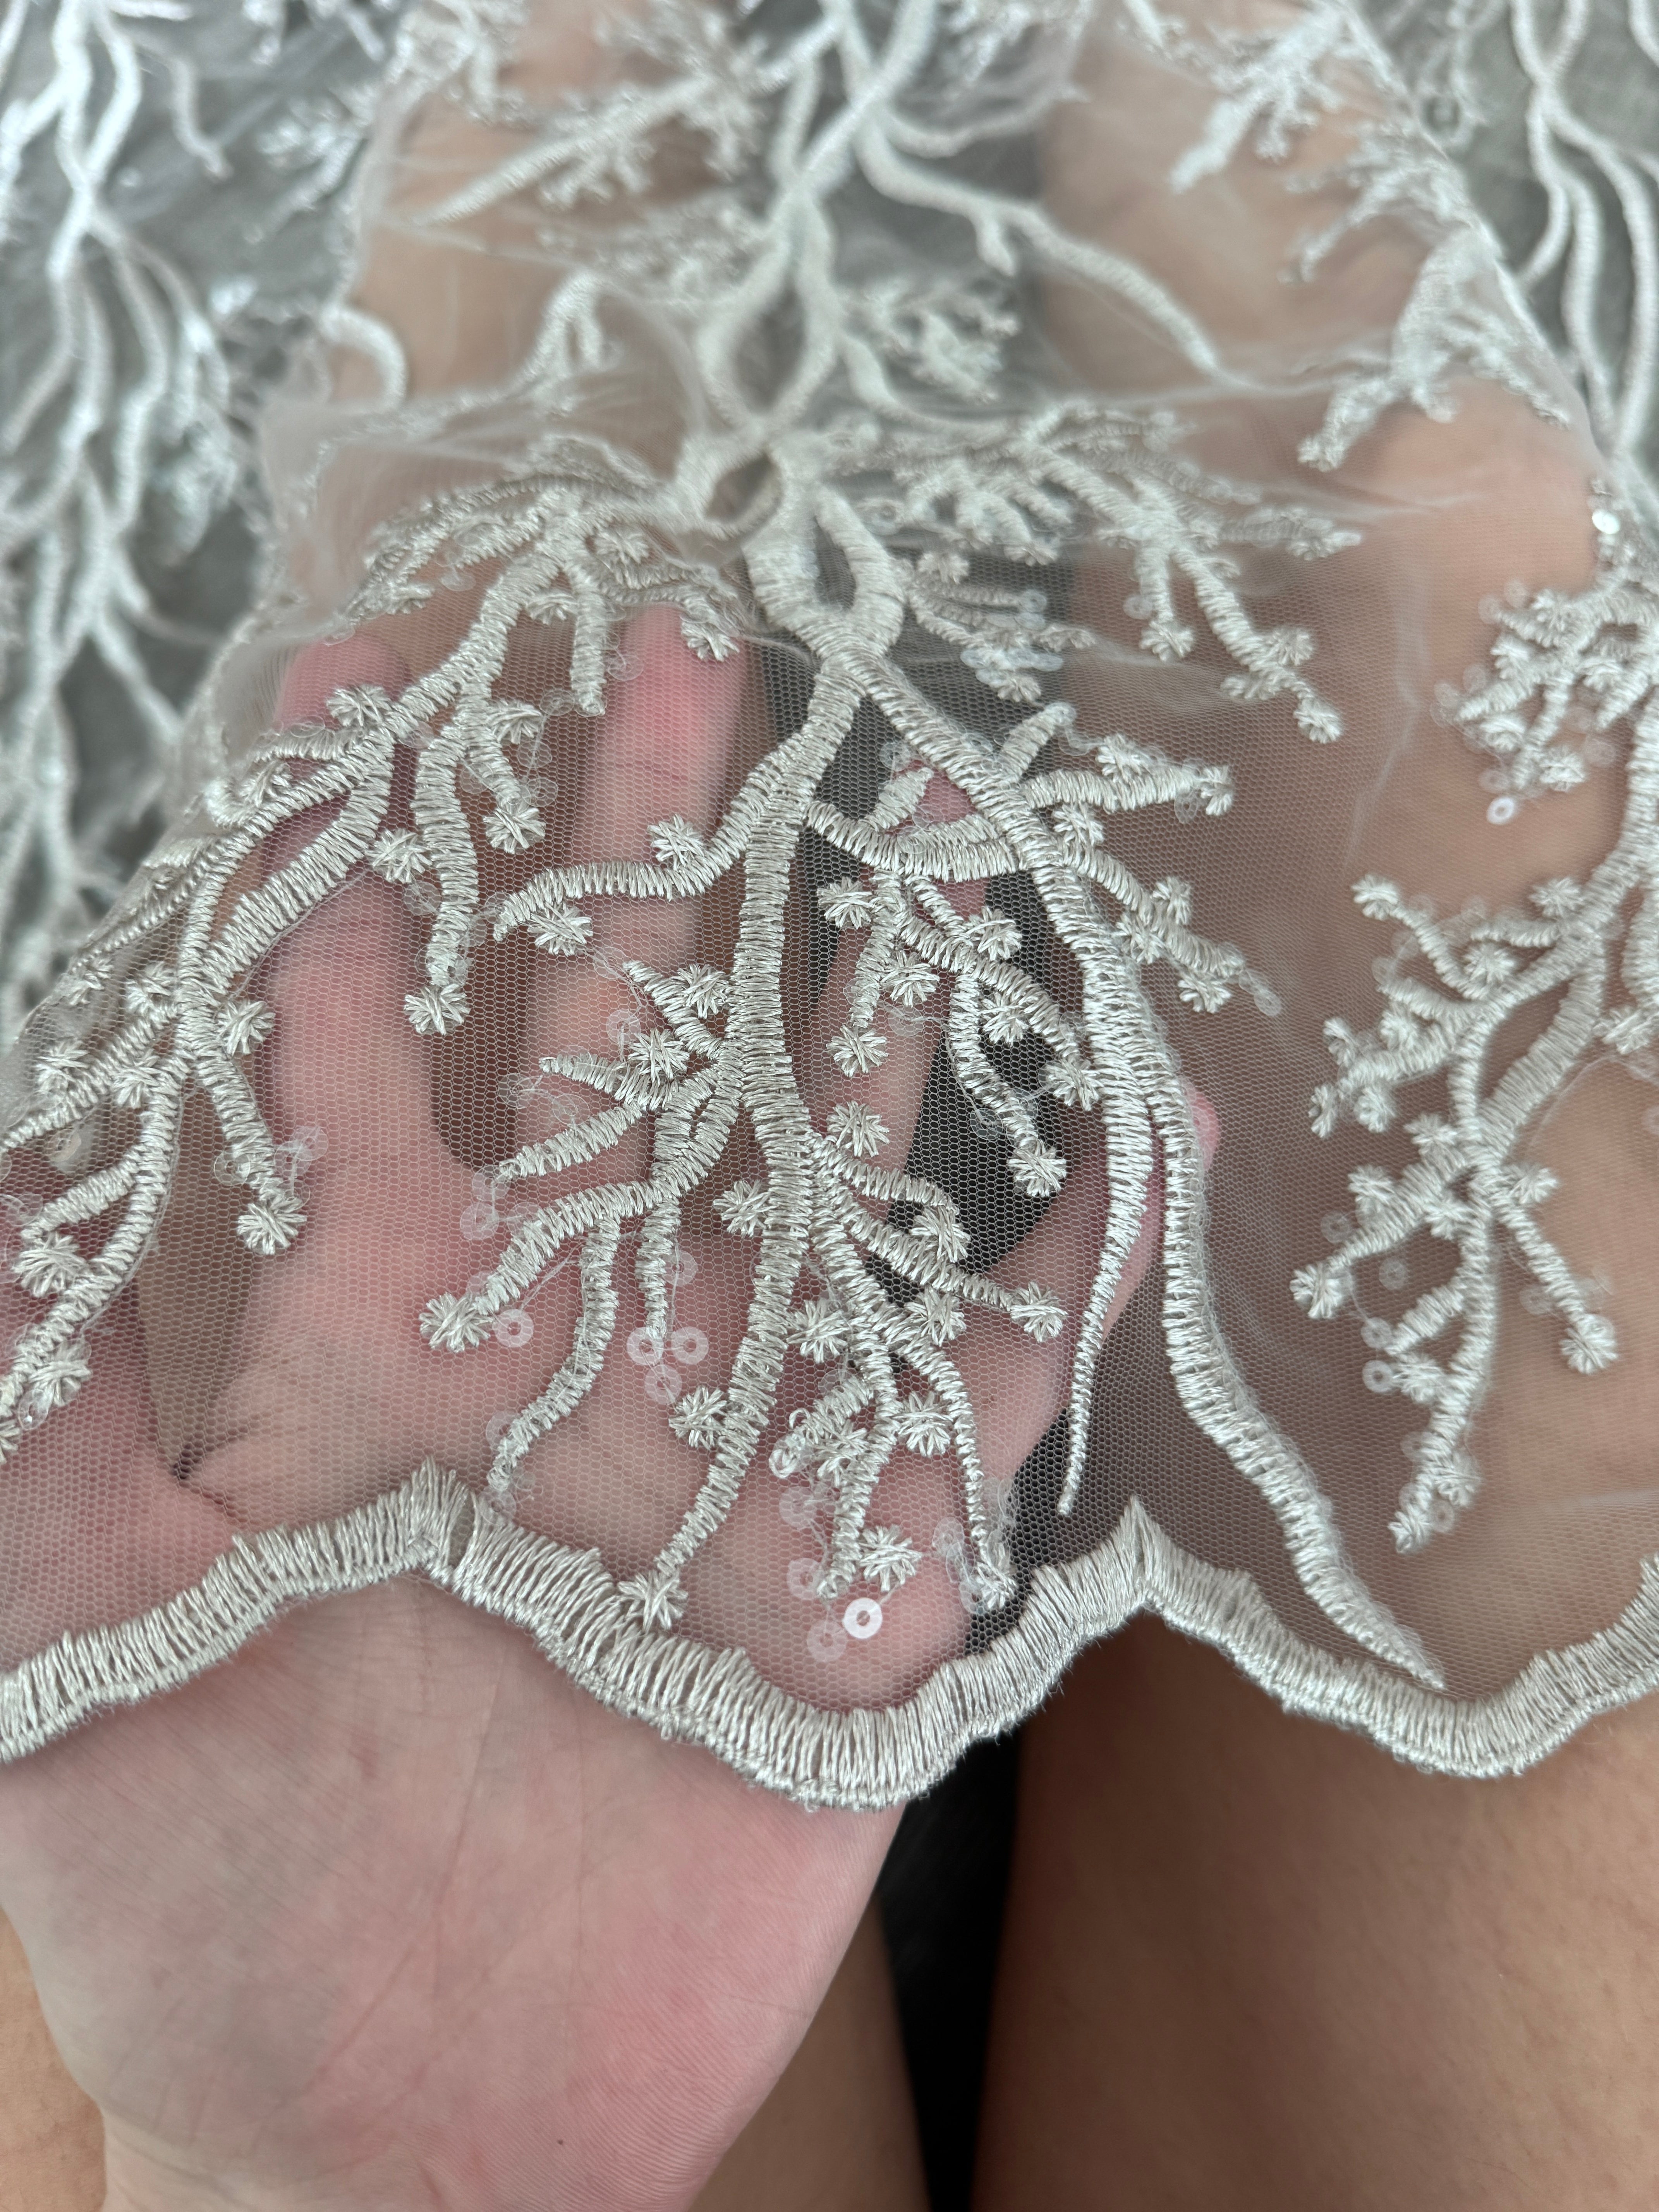 Silver Embroidered Branch Bridal Lace, dark silver Embroidered Branch Bridal Lace, light silver Embroidered Branch Bridal Lace, Embroidered Branch Bridal Lace for woman, Embroidered Branch Bridal Lace for bride, Embroidered Branch Bridal Lace on discount